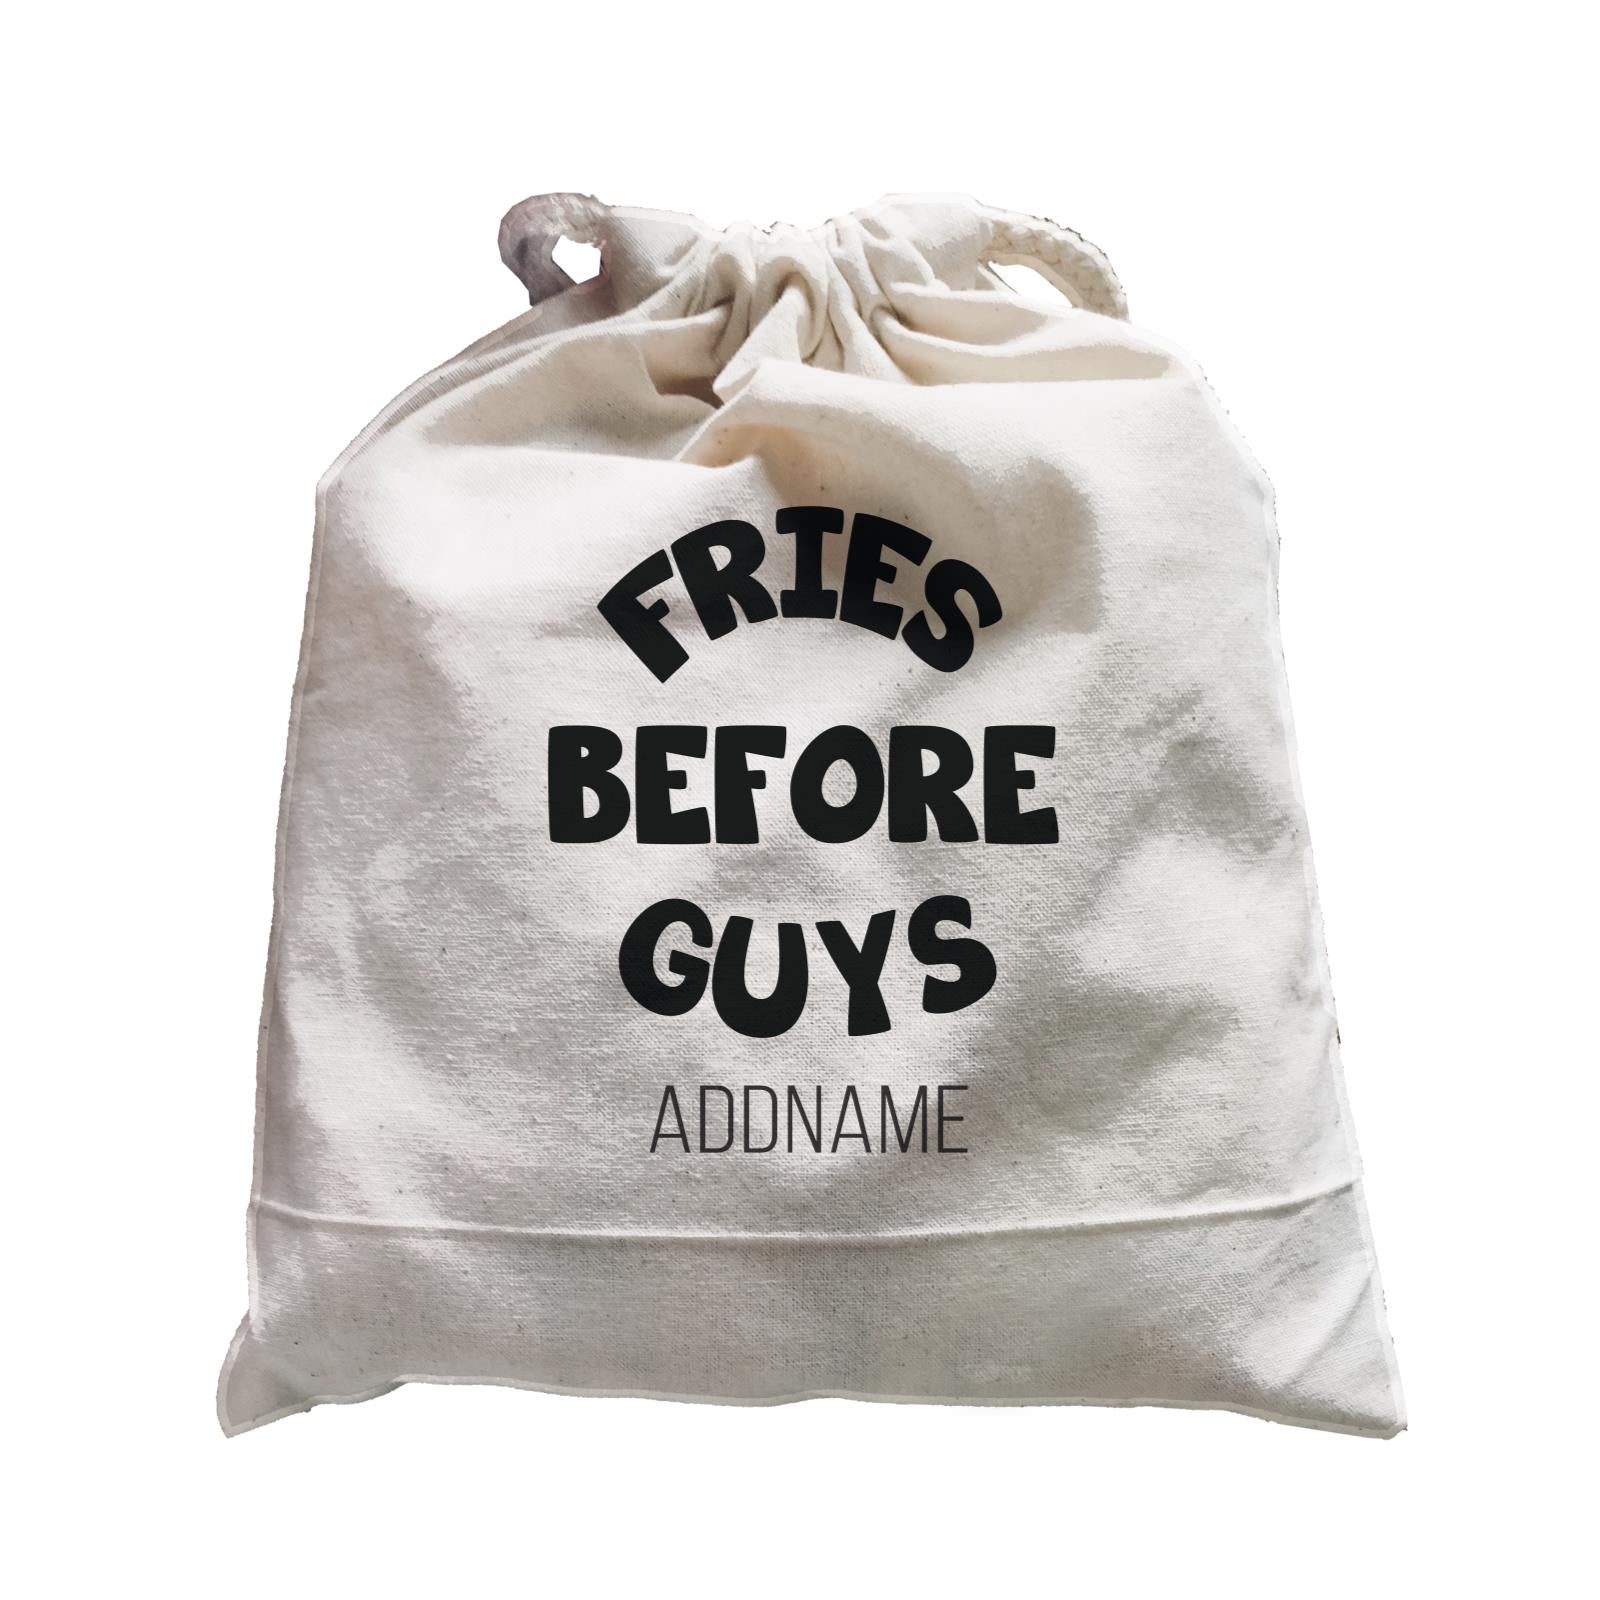 Girl Boss Quotes Fries Before Guys Addname Satchel